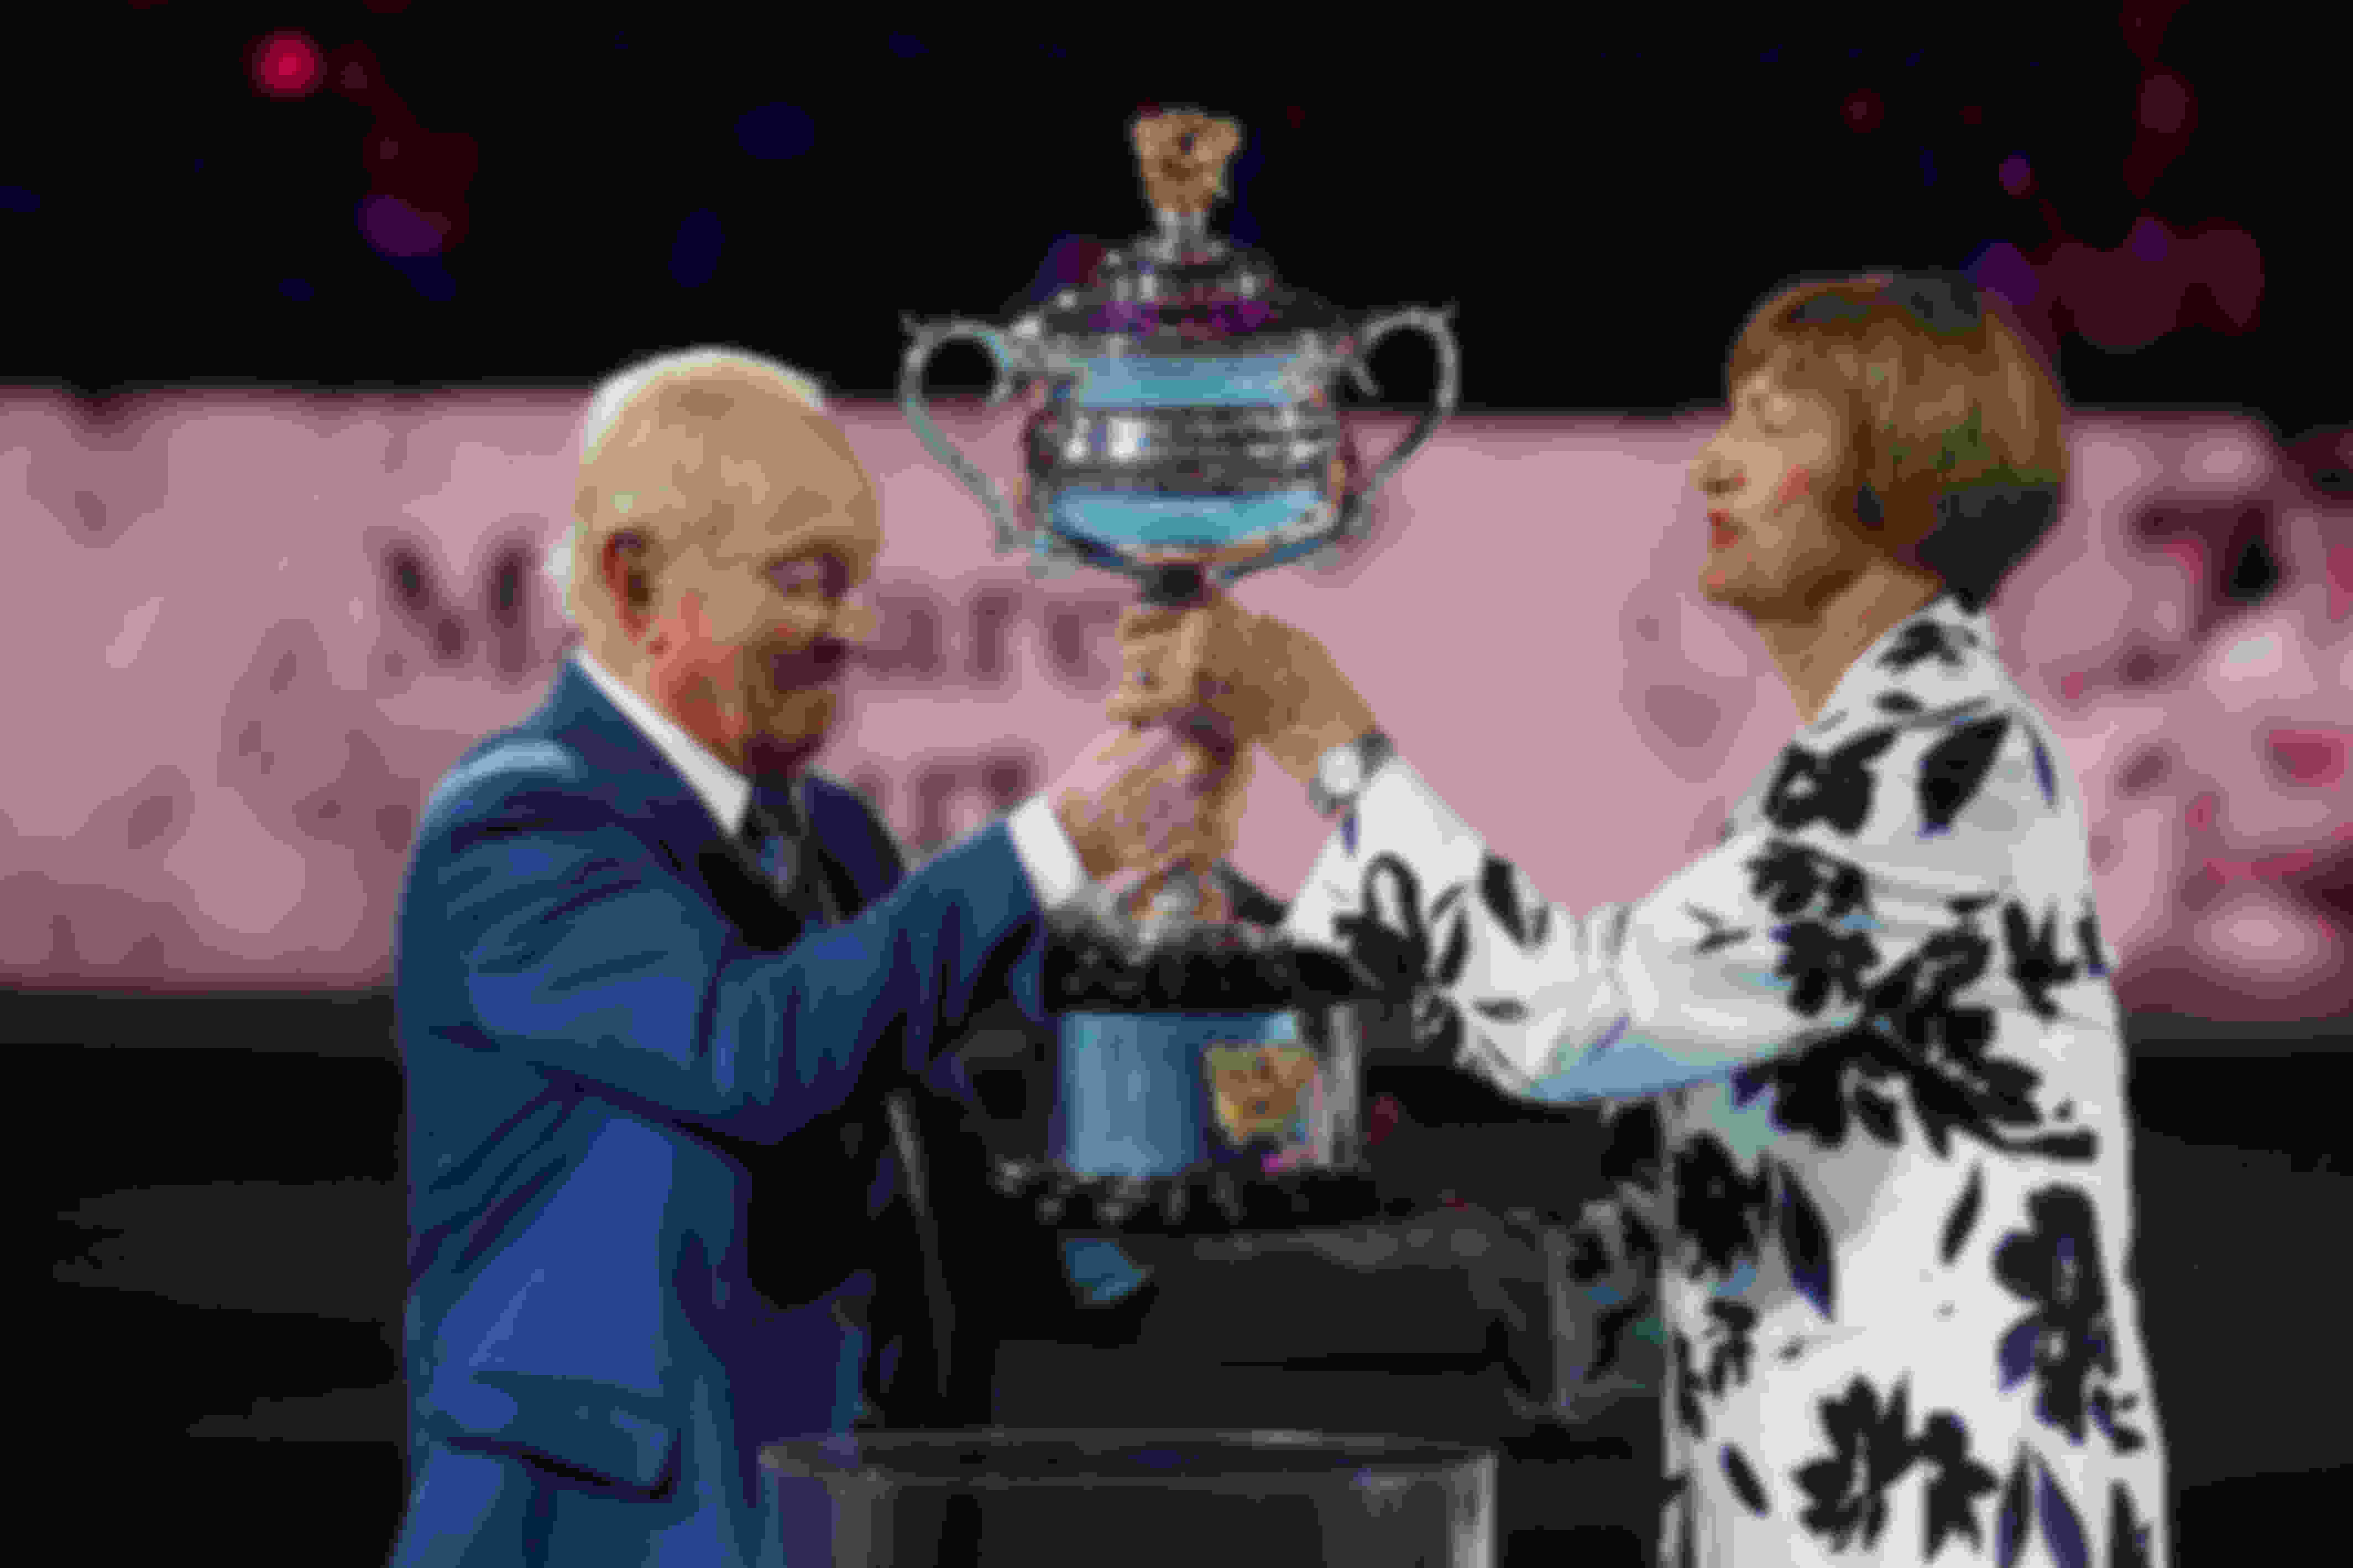 Rod Laver and Margaret Court were the first Australian Open men’s and women’s singles champions.